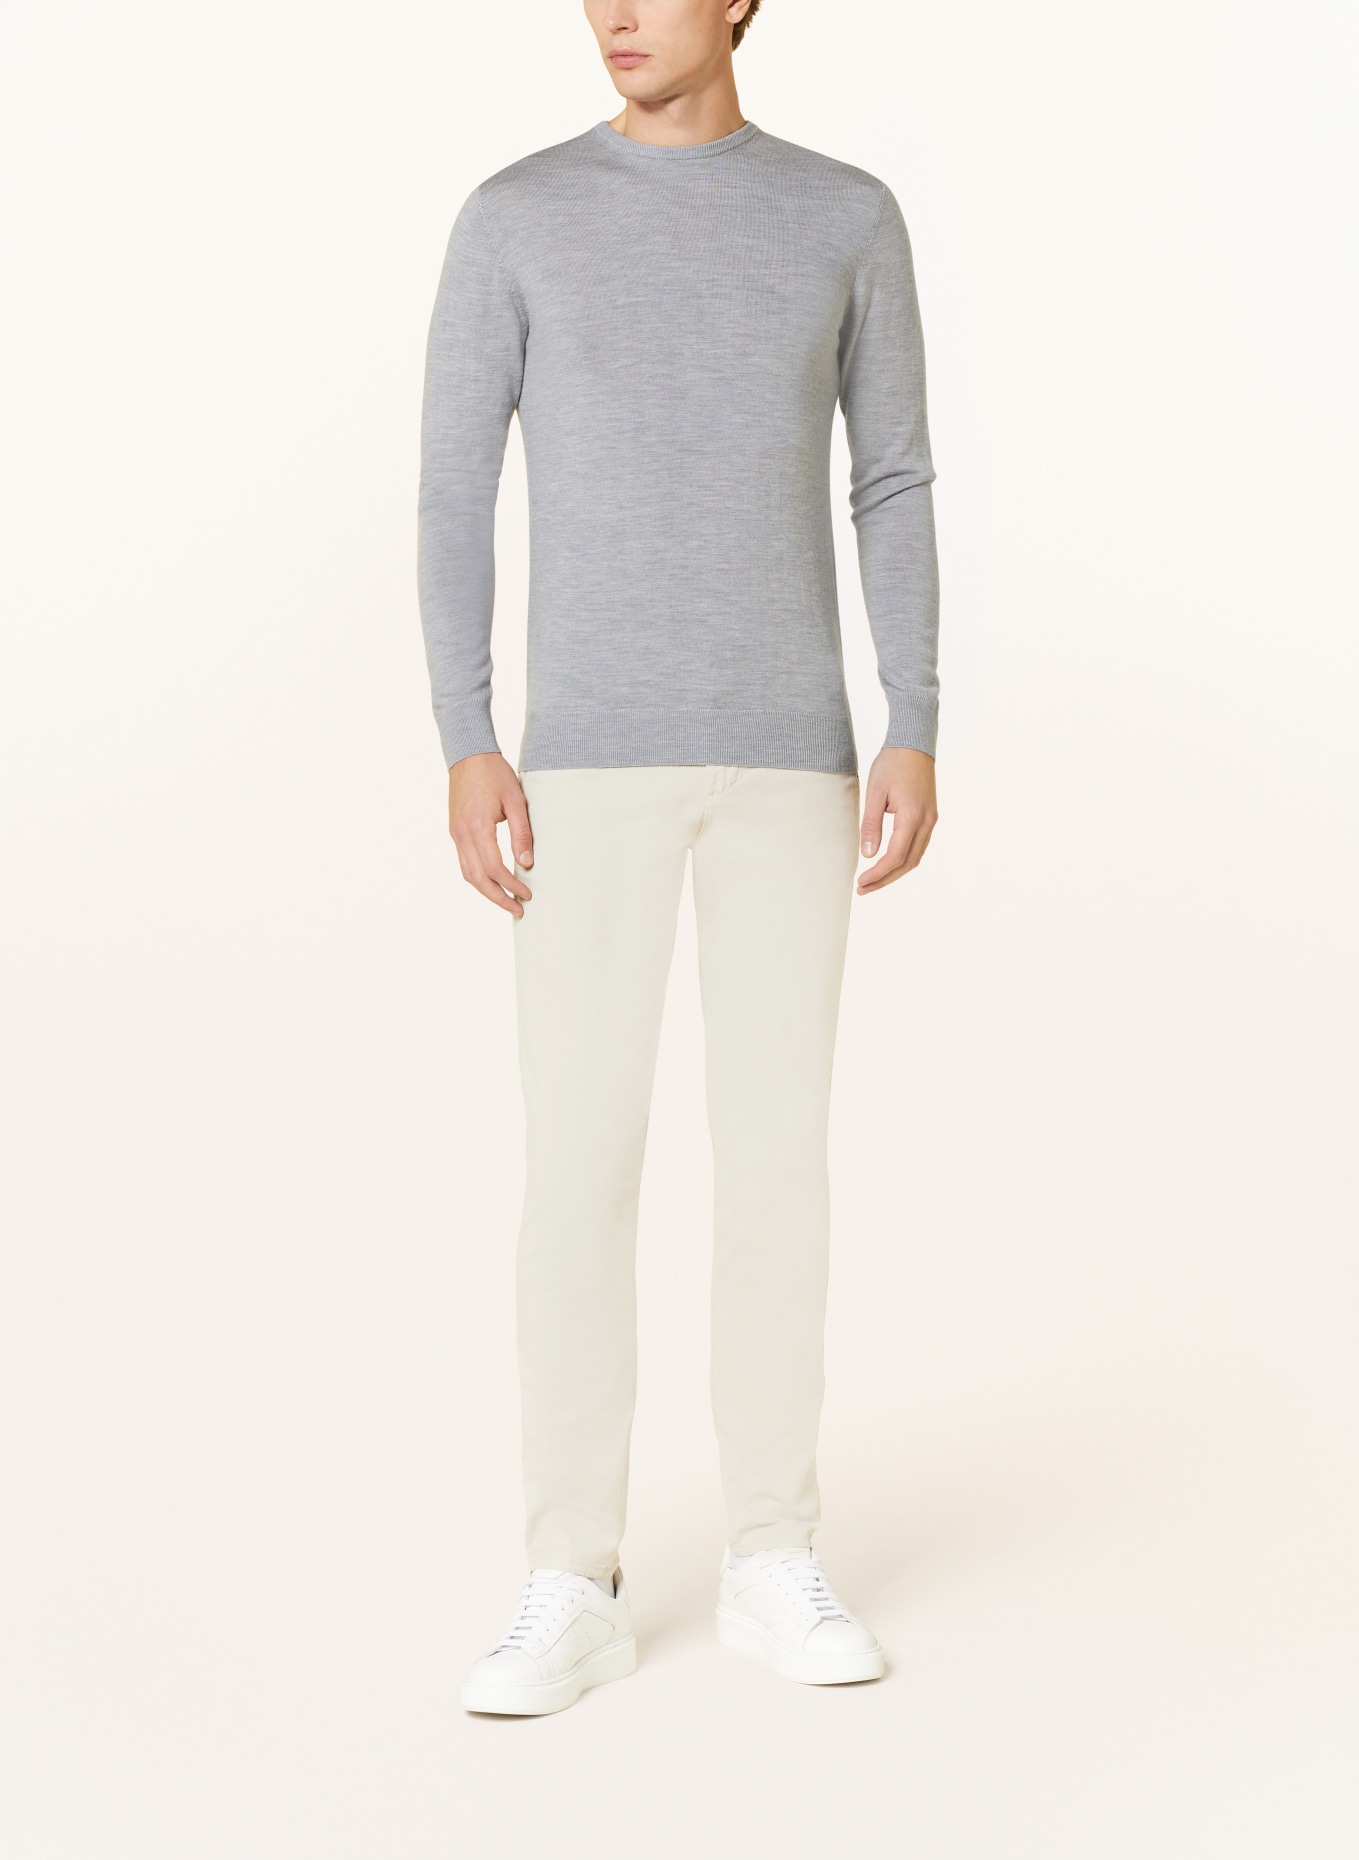 PROFUOMO Sweater made of merino wool, Color: GRAY (Image 2)